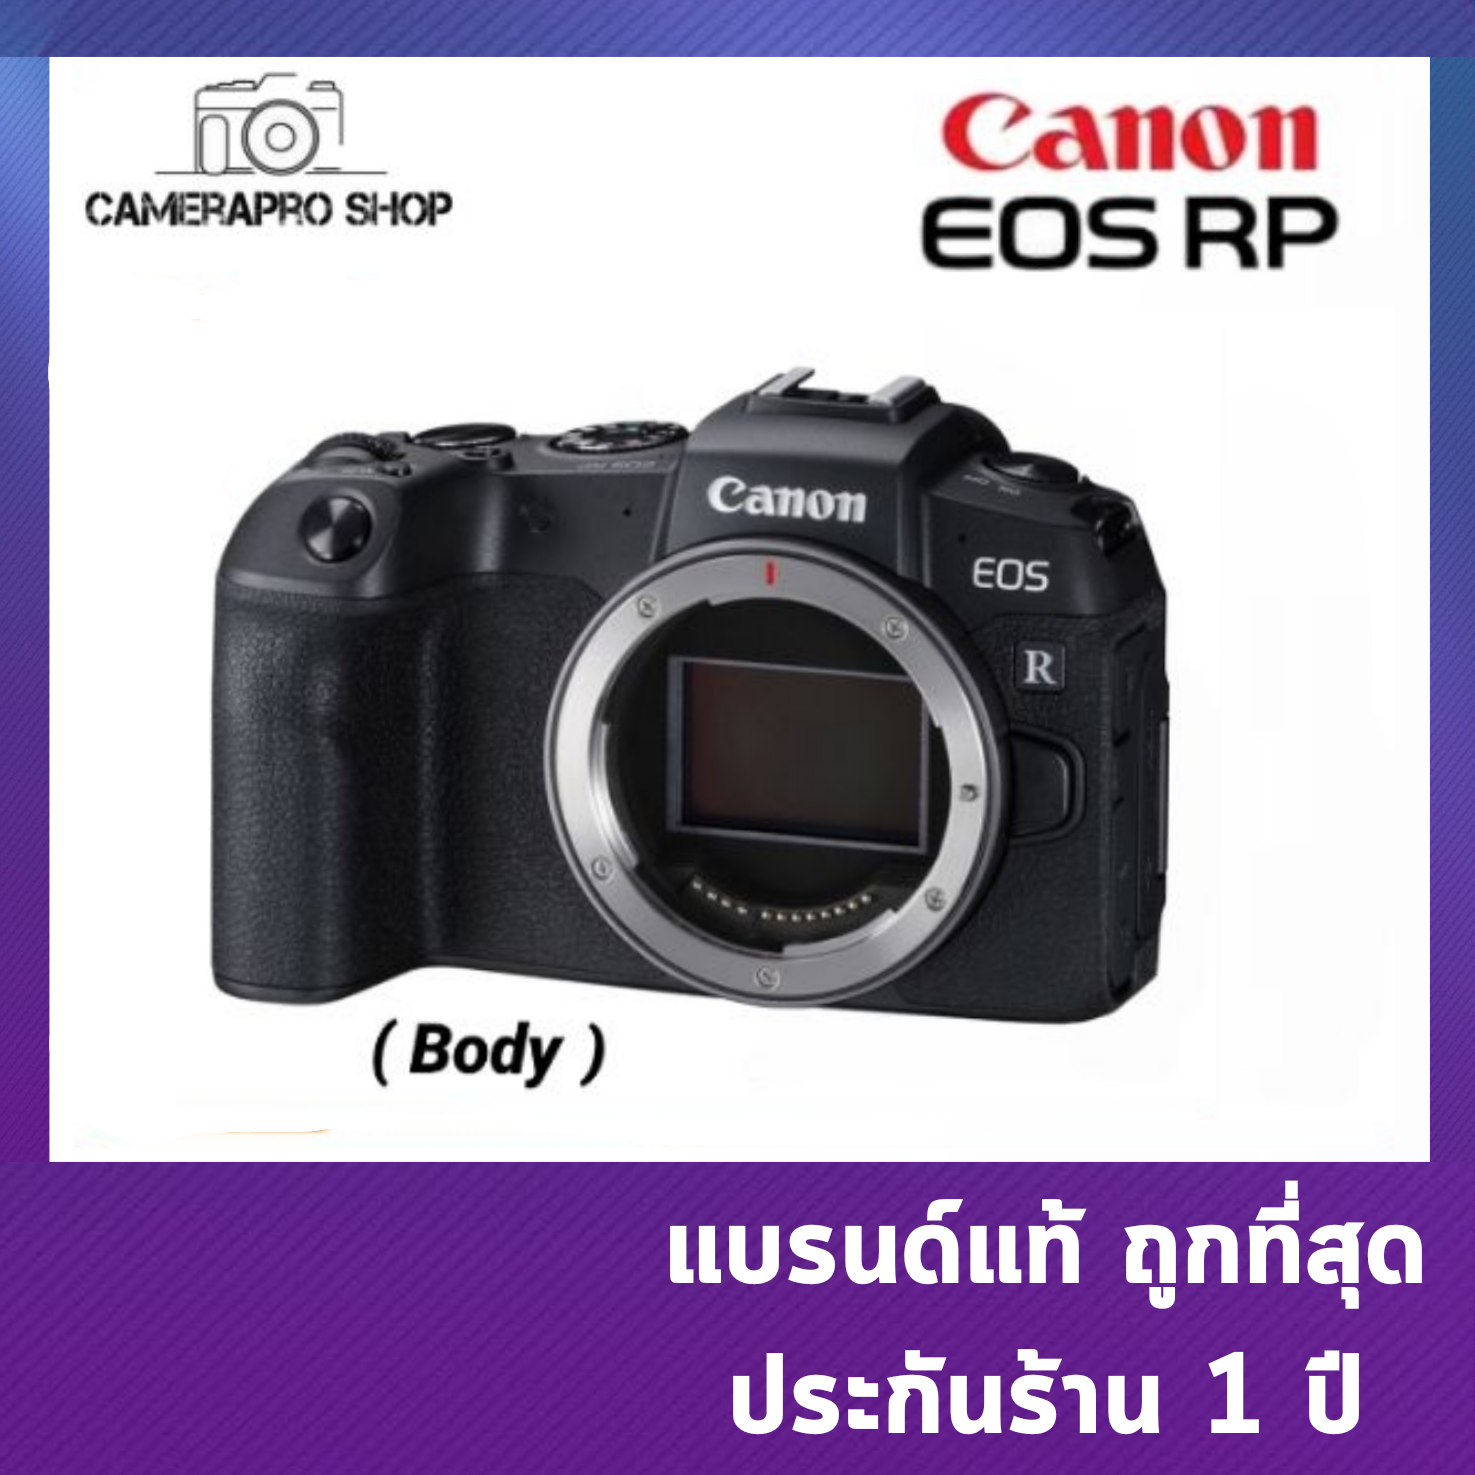 Canon EOS RP ( Body)เมนูไทย(รับประกัน1ปี By Cameraproshop)